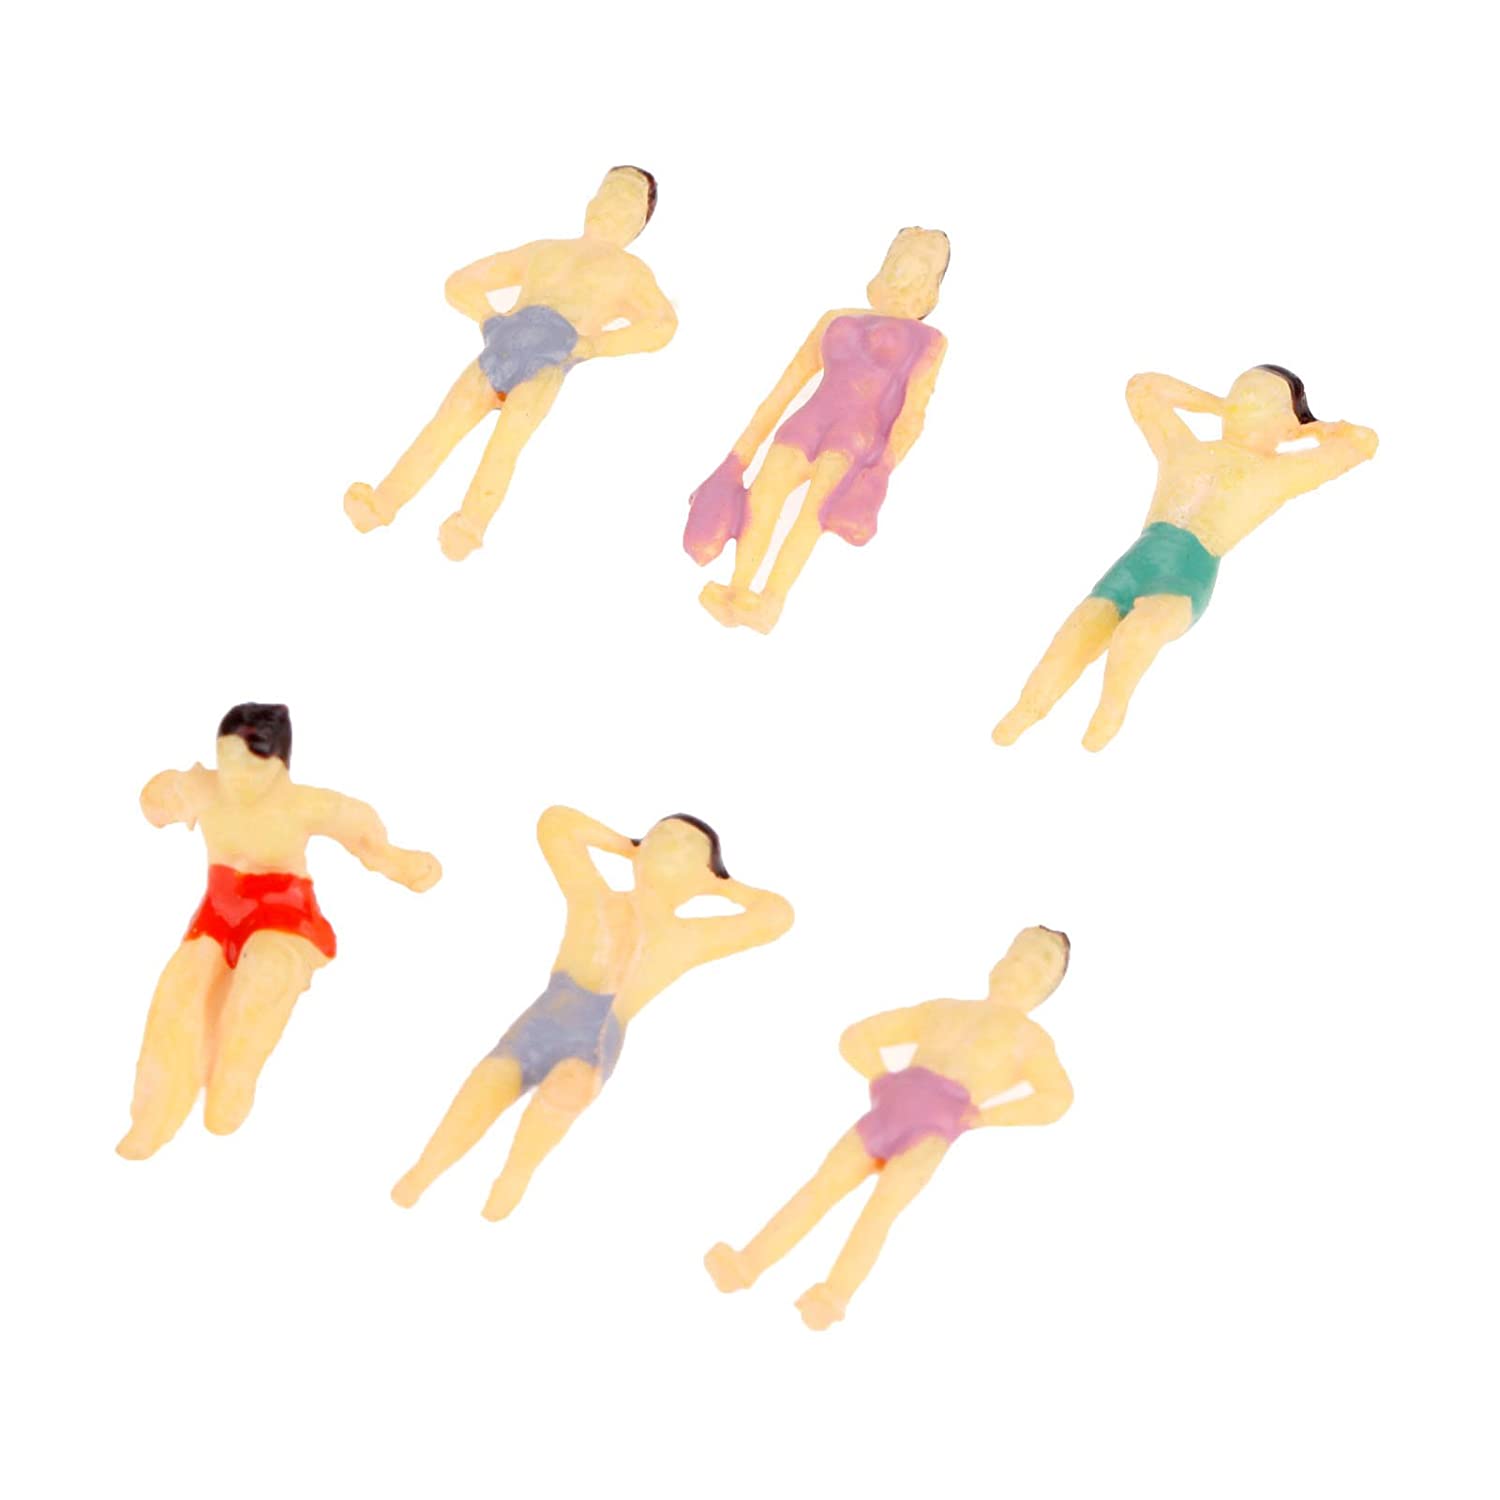 SWIMMING FIGURES PAINTED